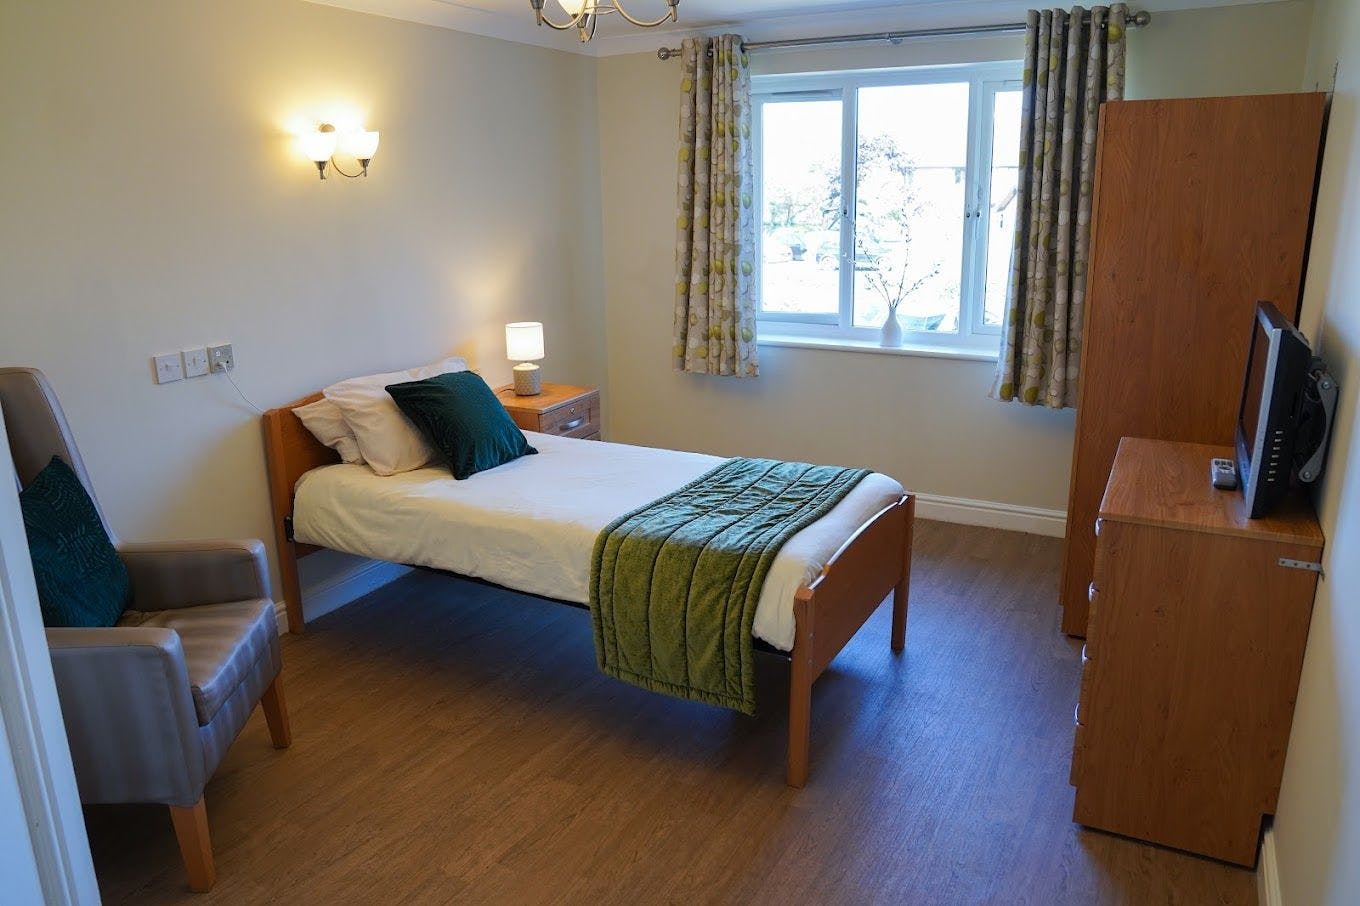 Bedroom at Birchwood Court Care Home in Peterlee, County Durham